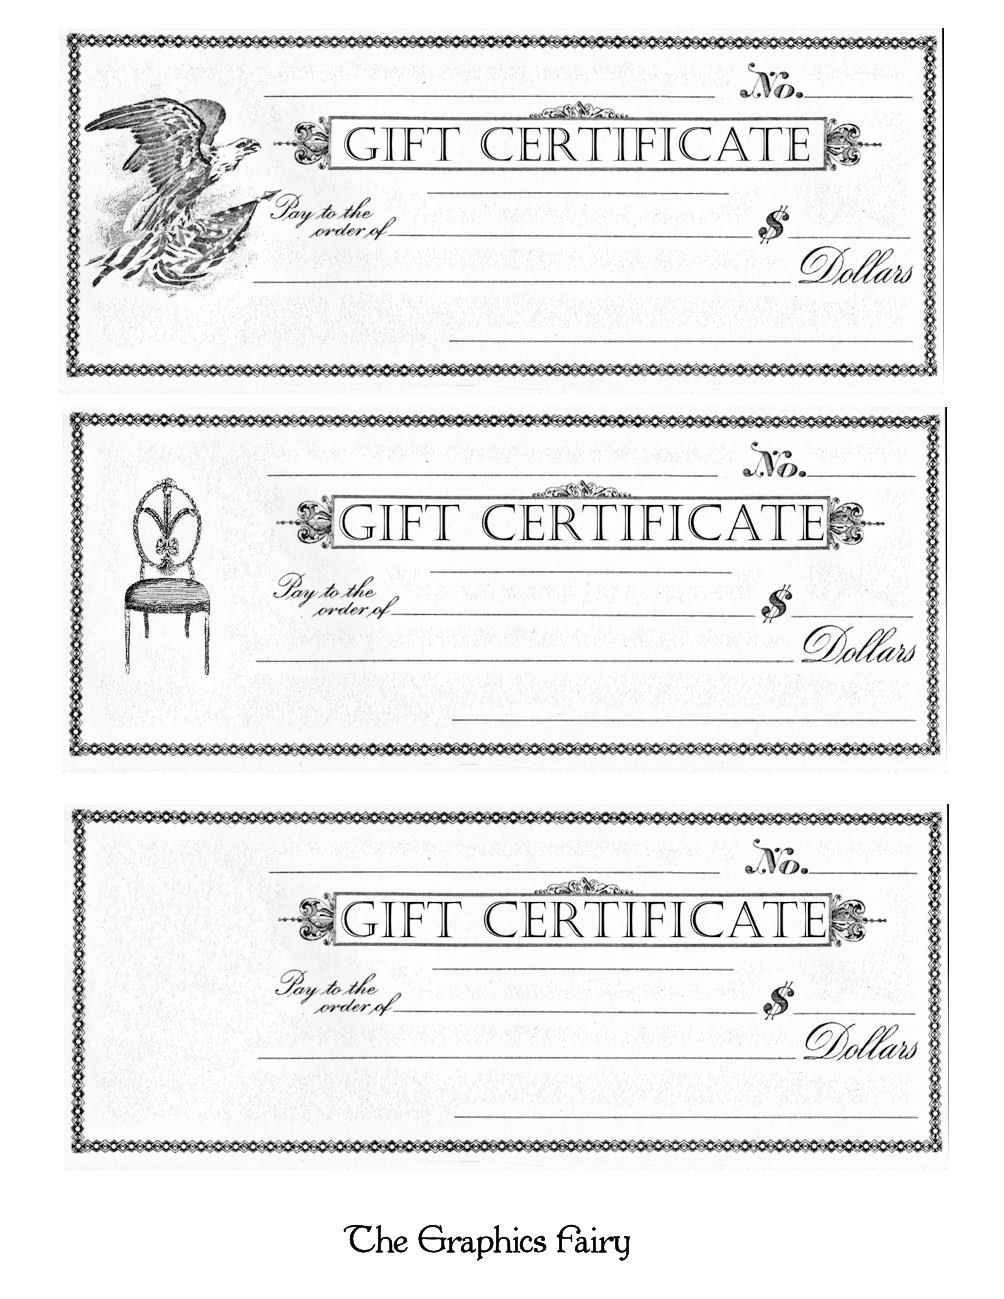 gift-certificate-templates-free-printable